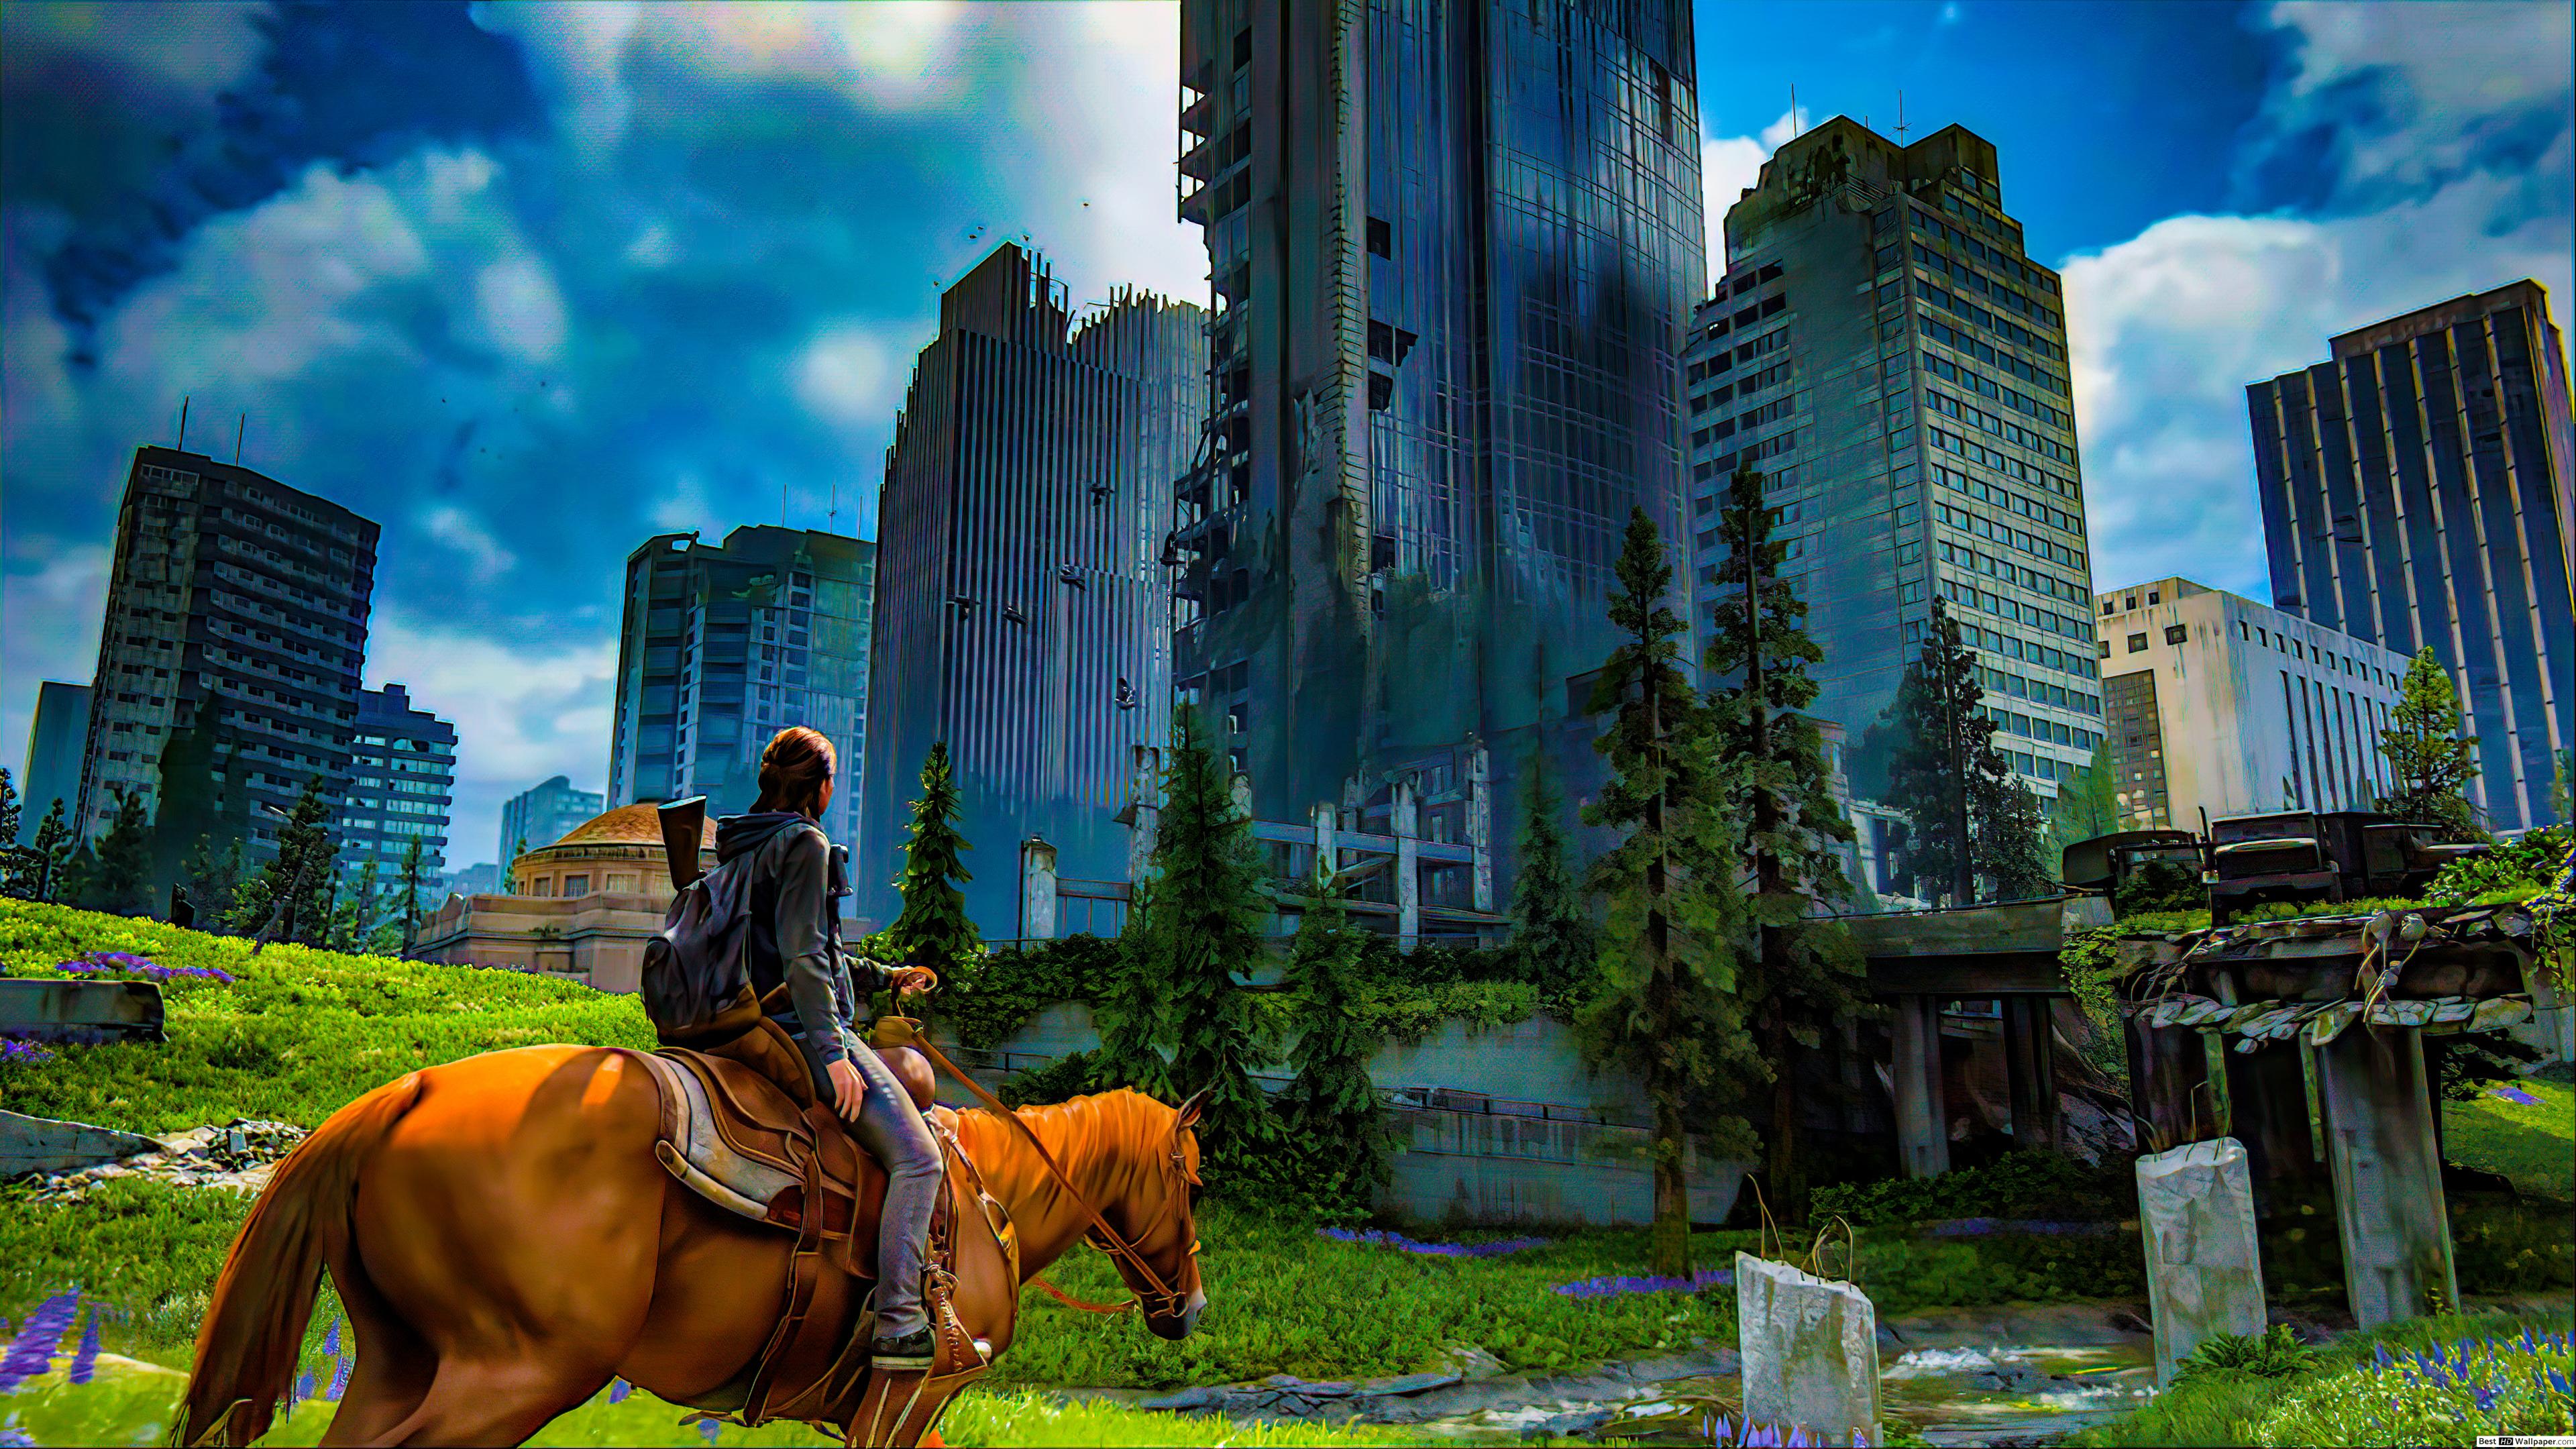 The Last Of Us 2K 4K. wallpaper. Ellie with horse city